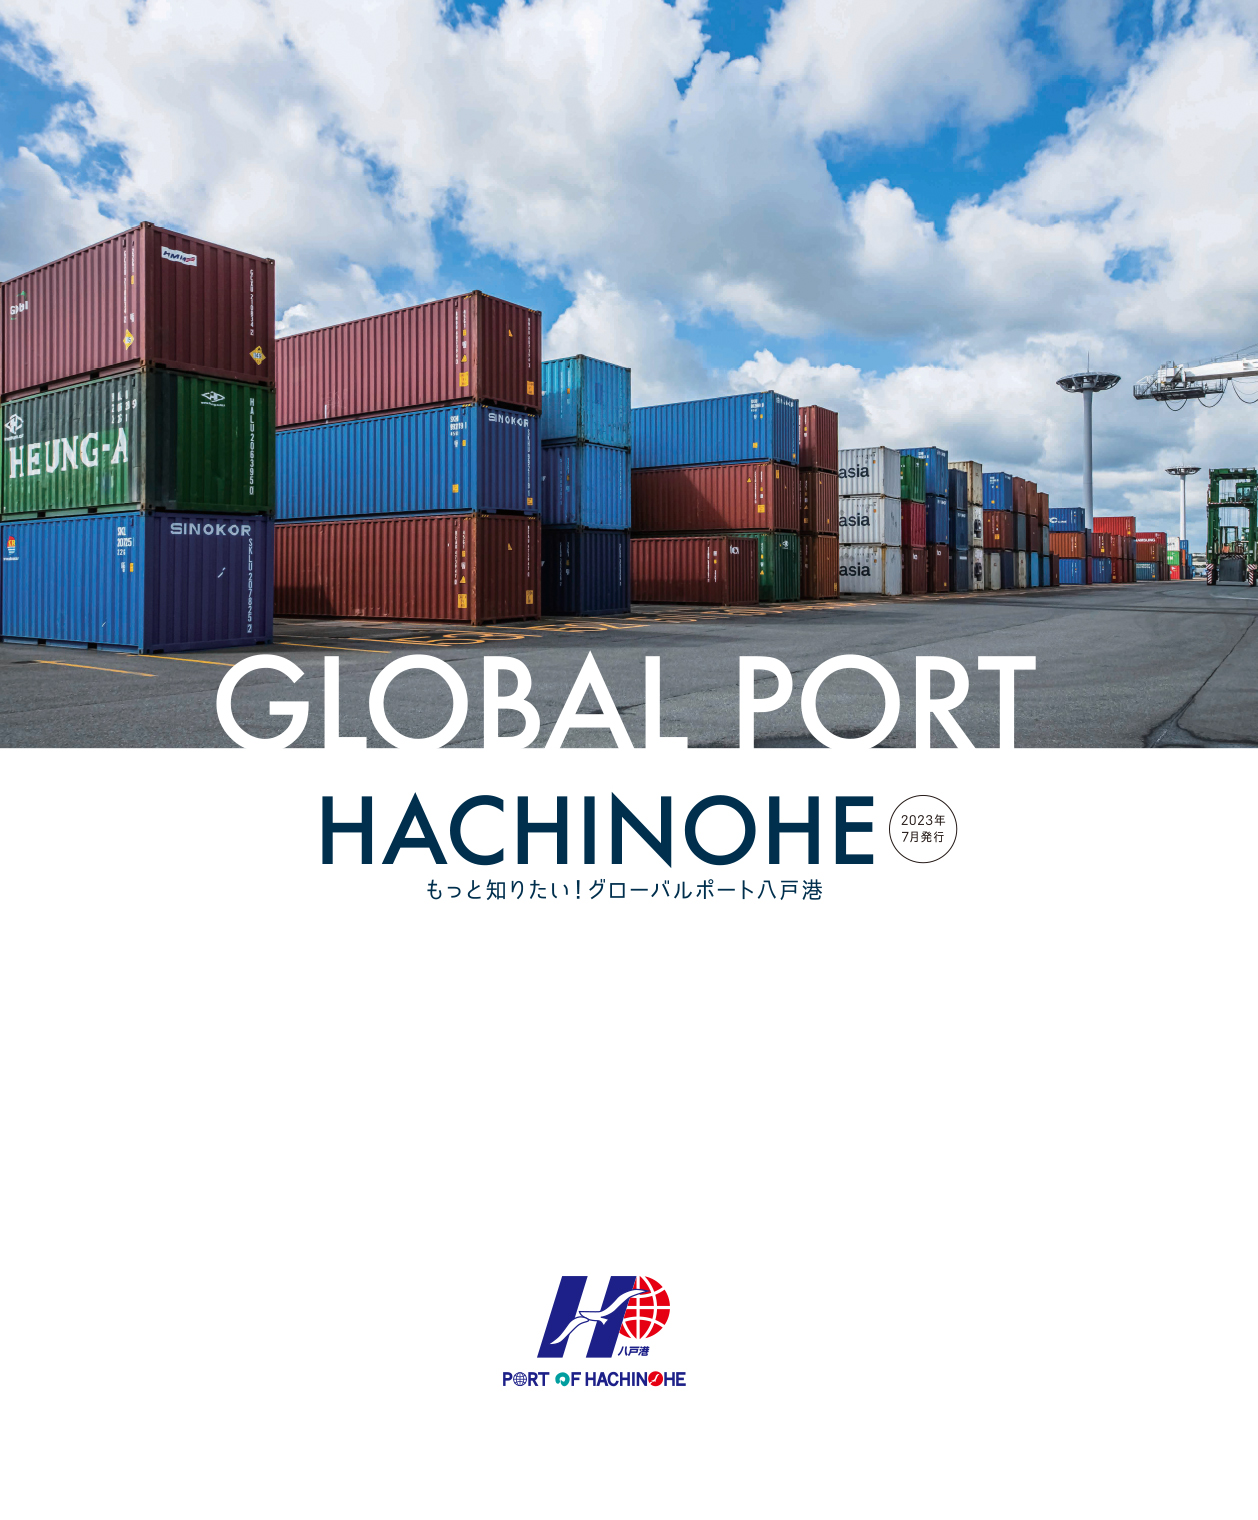 Guide to Hachinohe Port「GLOBAL PORT HACHINOHE」